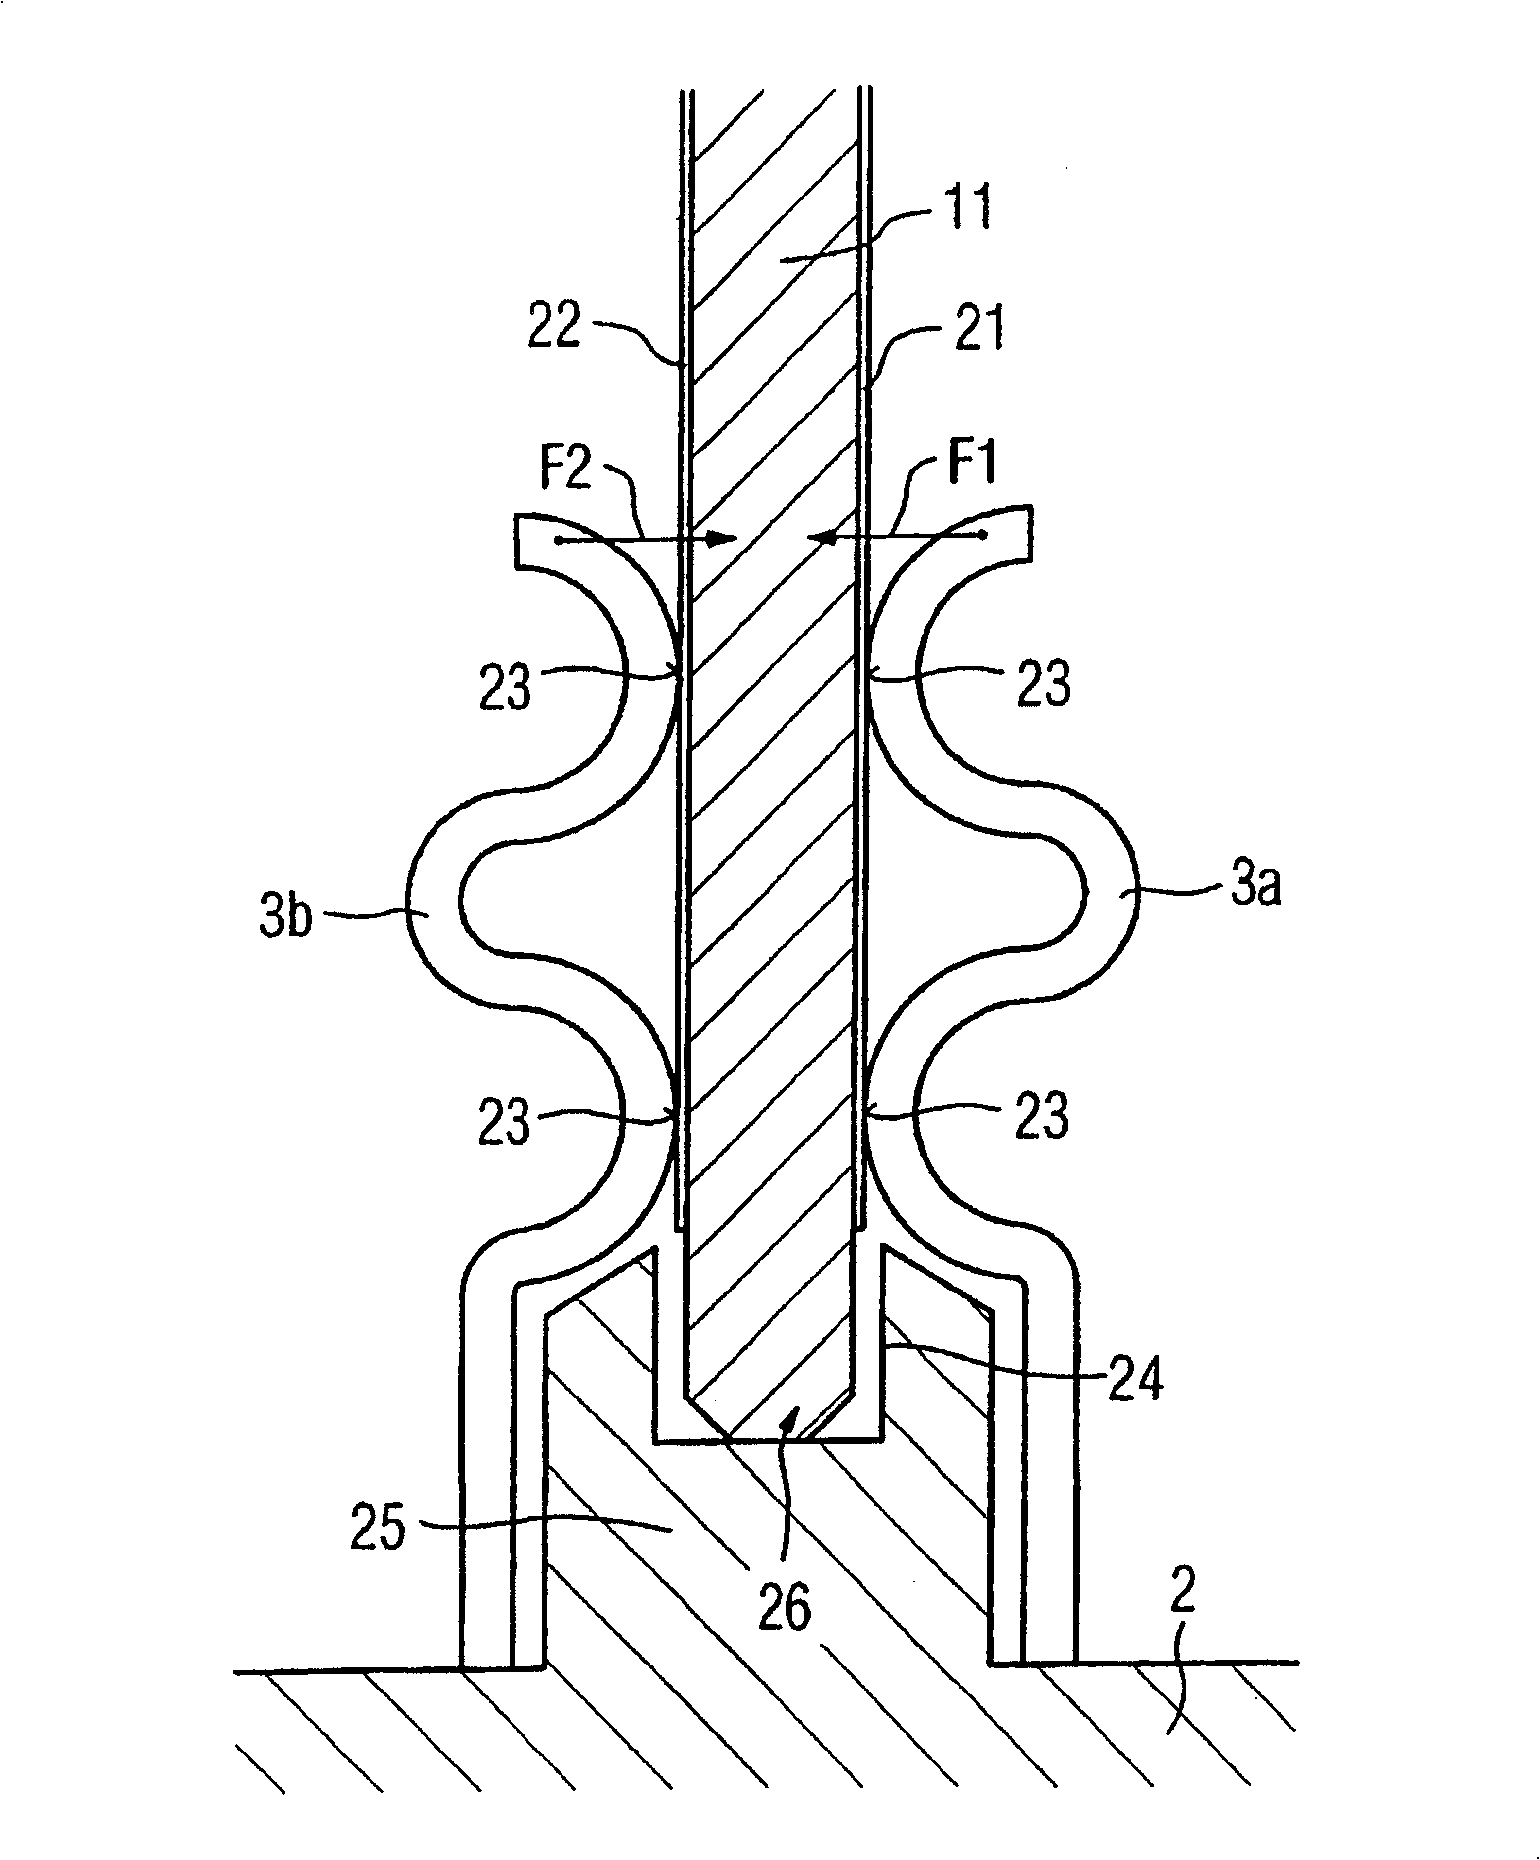 Multipoint plug for electrically connecting metal strip conductors arranged on both sides of a circuit board